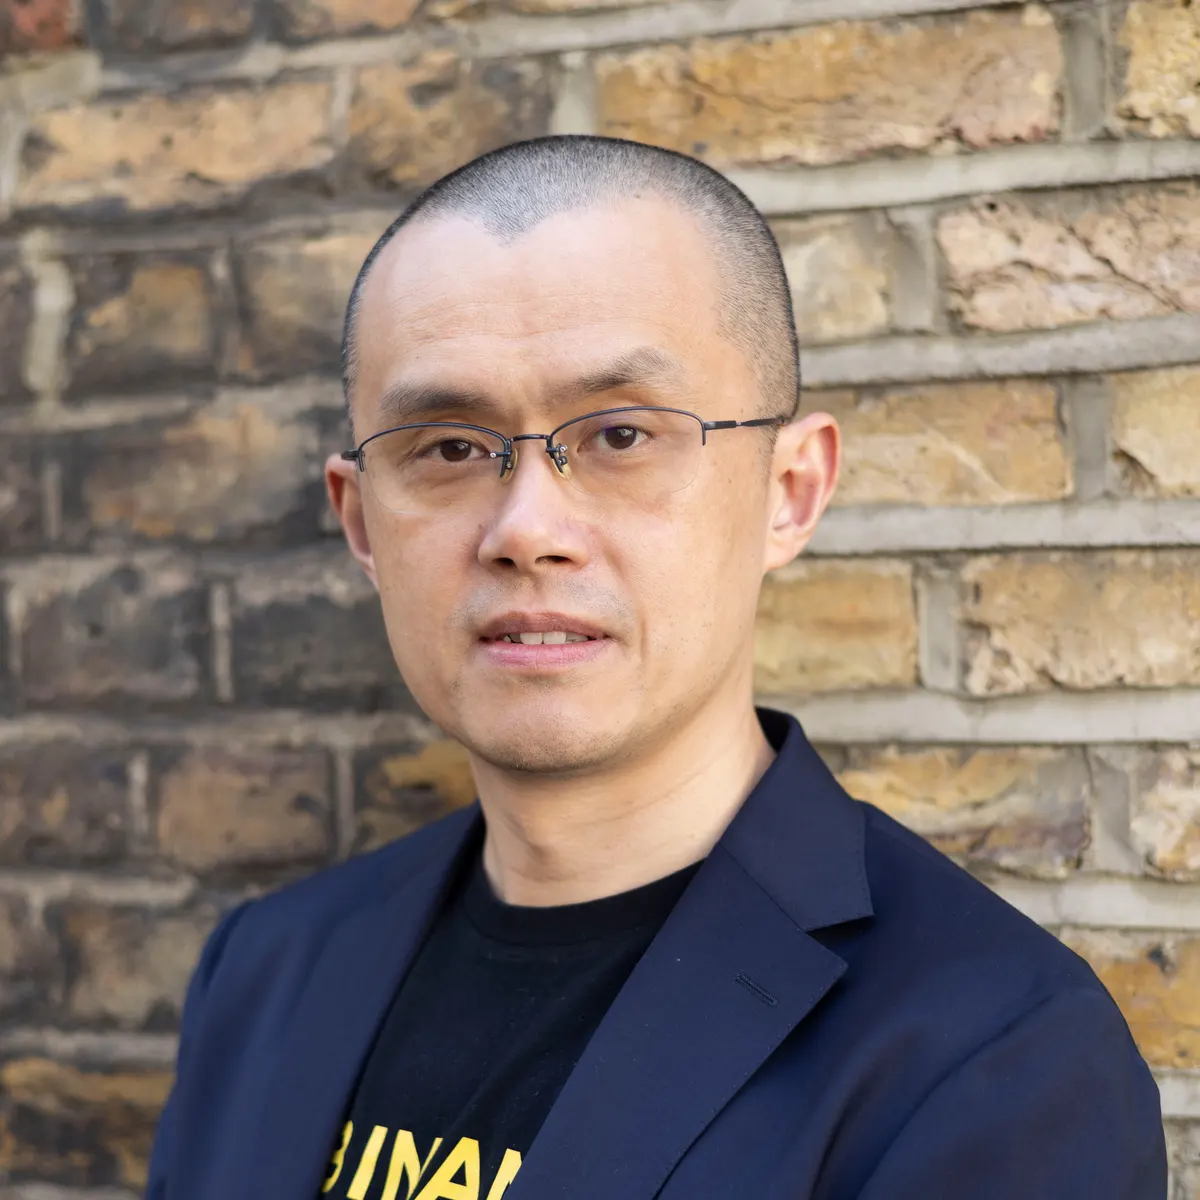 Ex-binance-ceo-changpeng-zhao-receives-4-months-jail-time-for-aml-violations